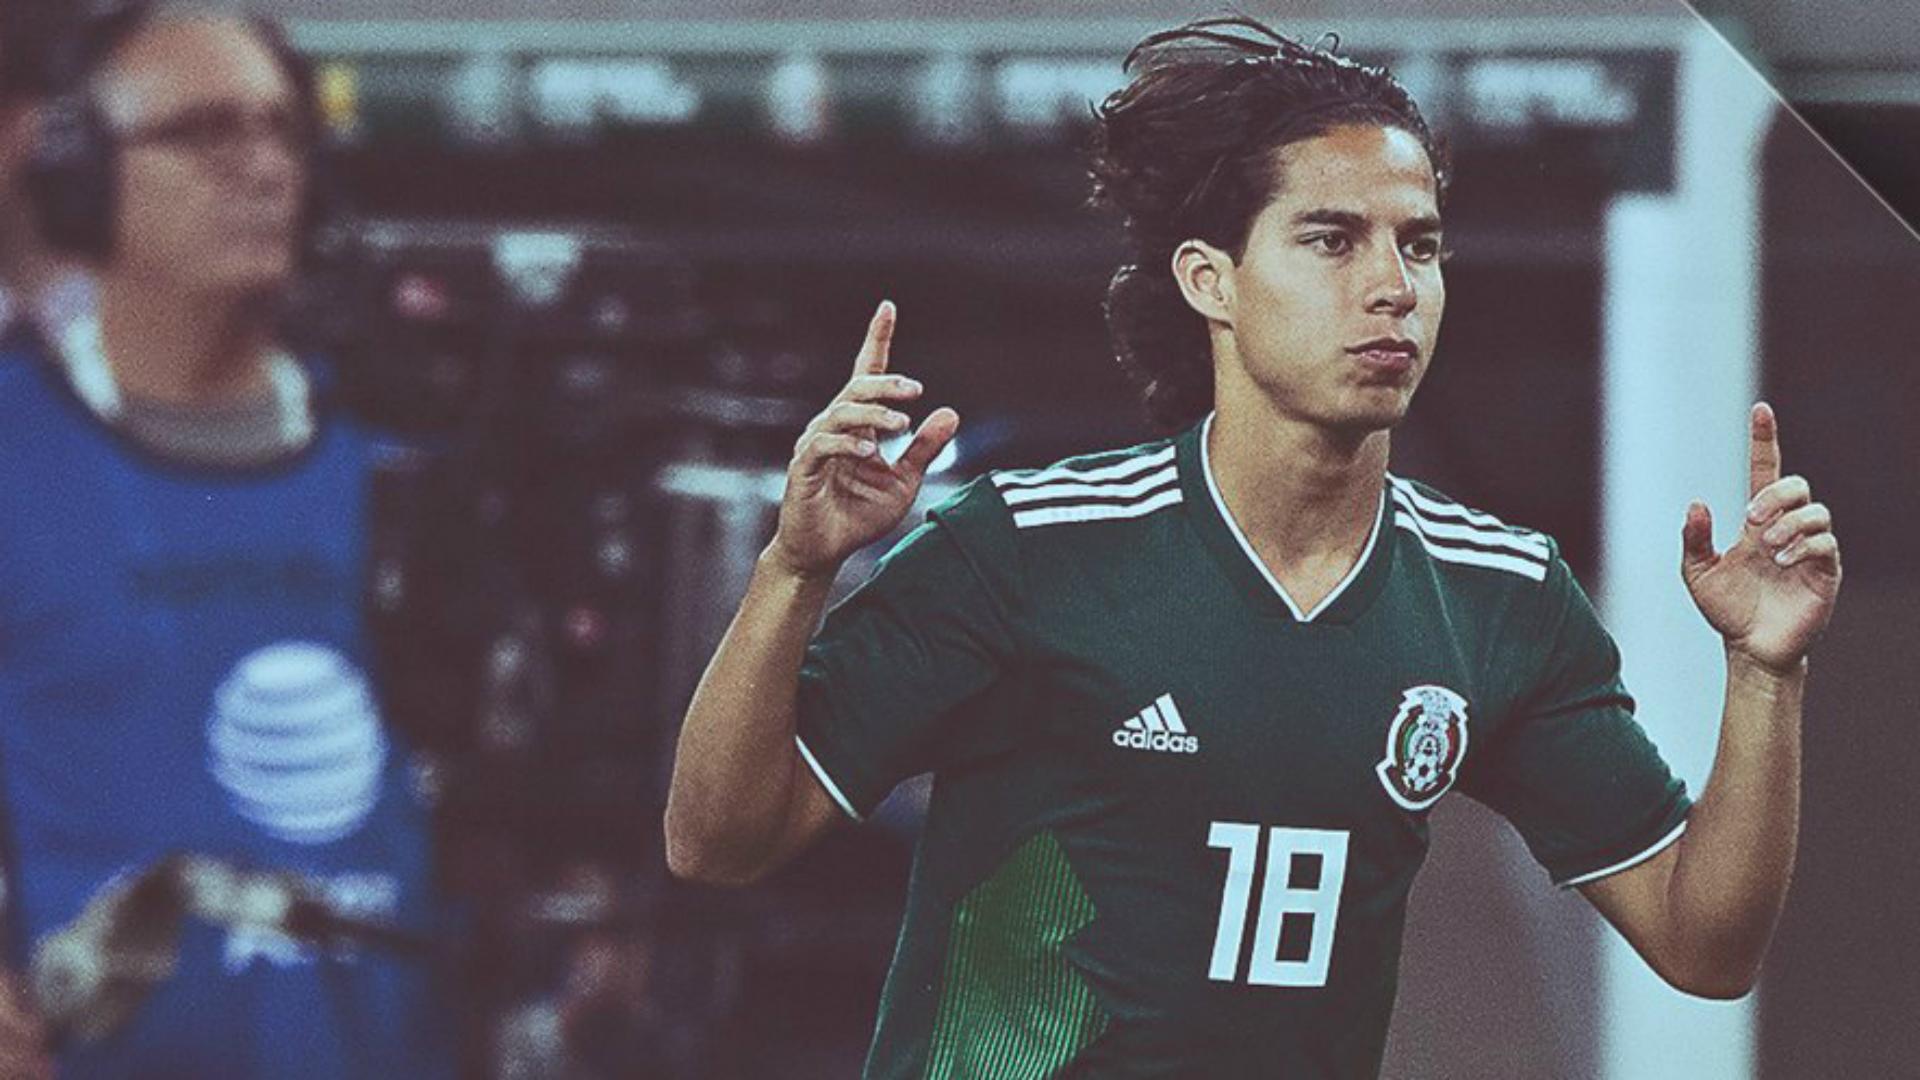 In Spain, they qualify Diego Lainez as the new leader